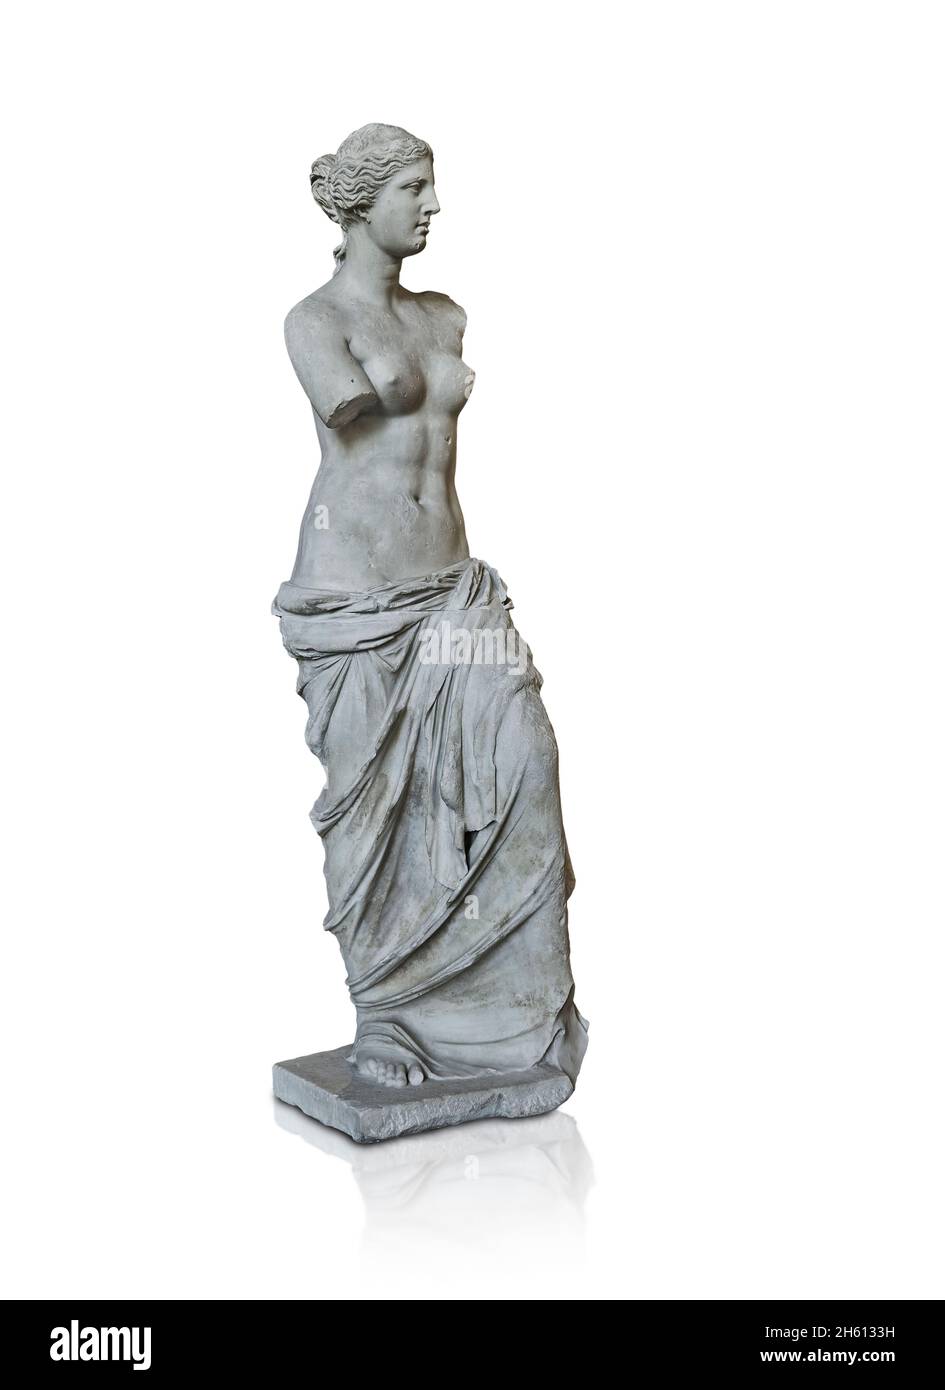 Venus de Milo ancinet Greek statue of Aphrodite, circa 150 and 125 BC,  Louvre Museum Ma399 or N527. Aphrodite is depicted hair in a bun with a  headban Stock Photo - Alamy